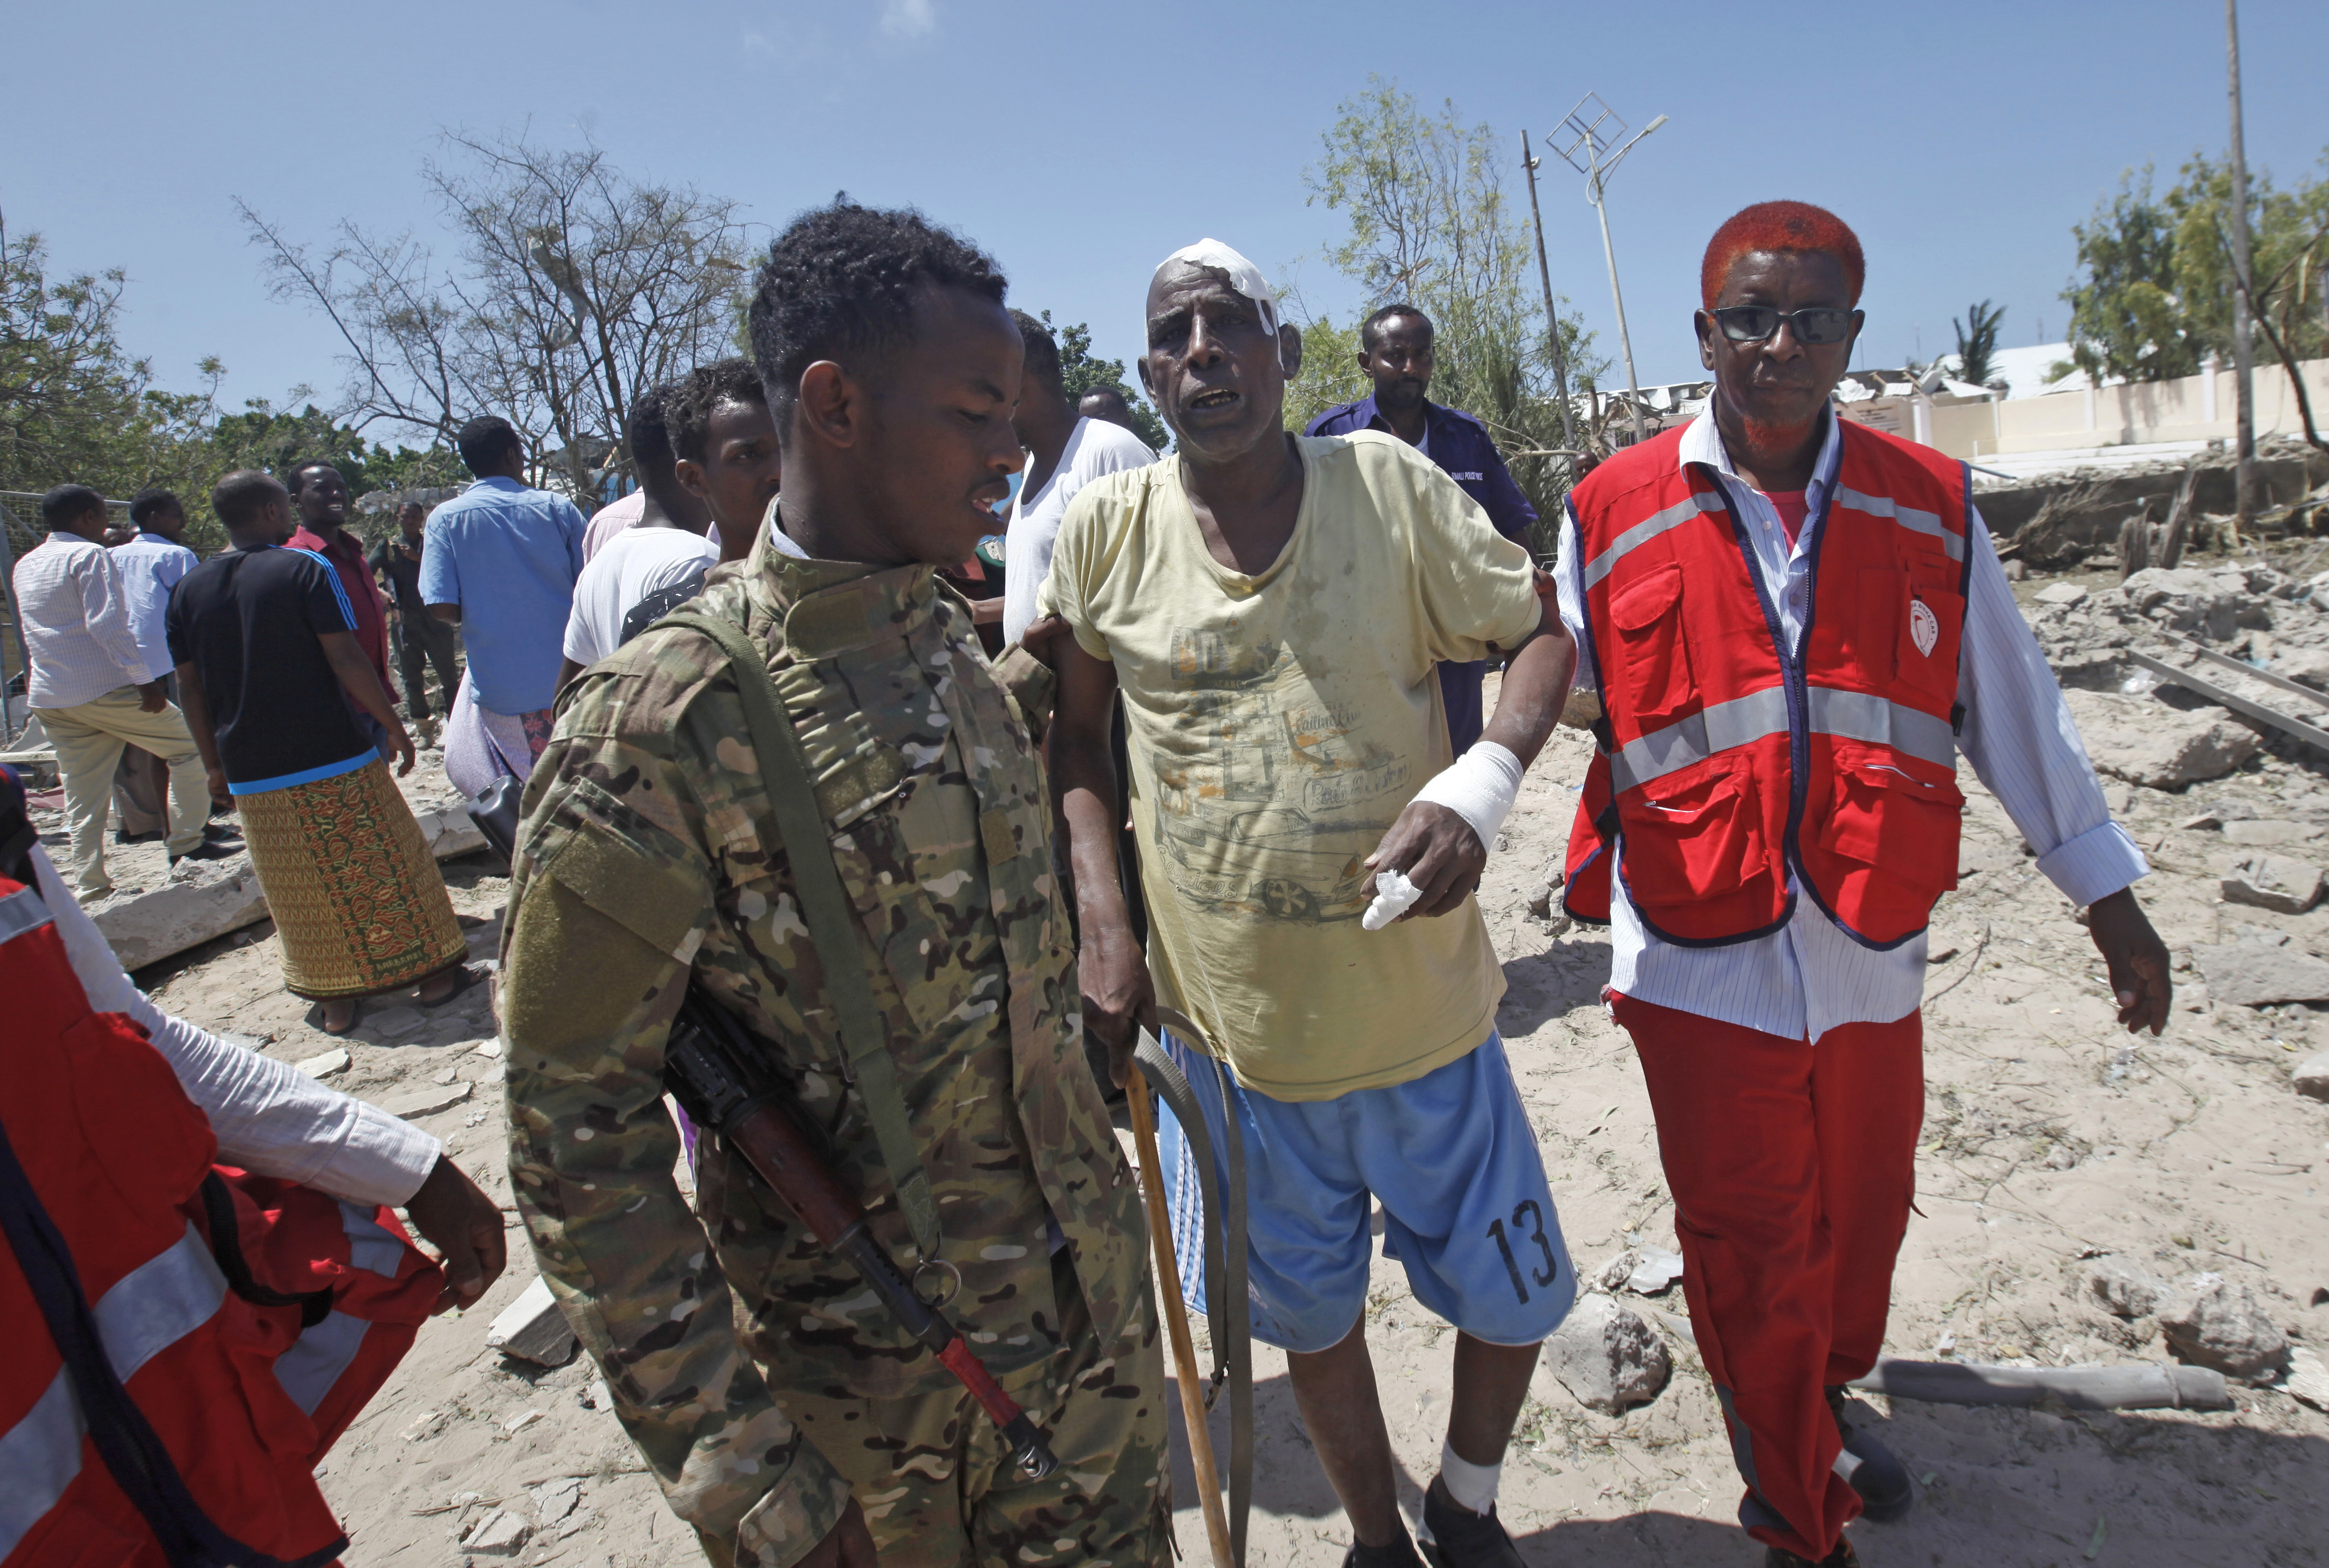 A Somali soldier and medic help a civilian who was wounded in a blast in Mogadishu